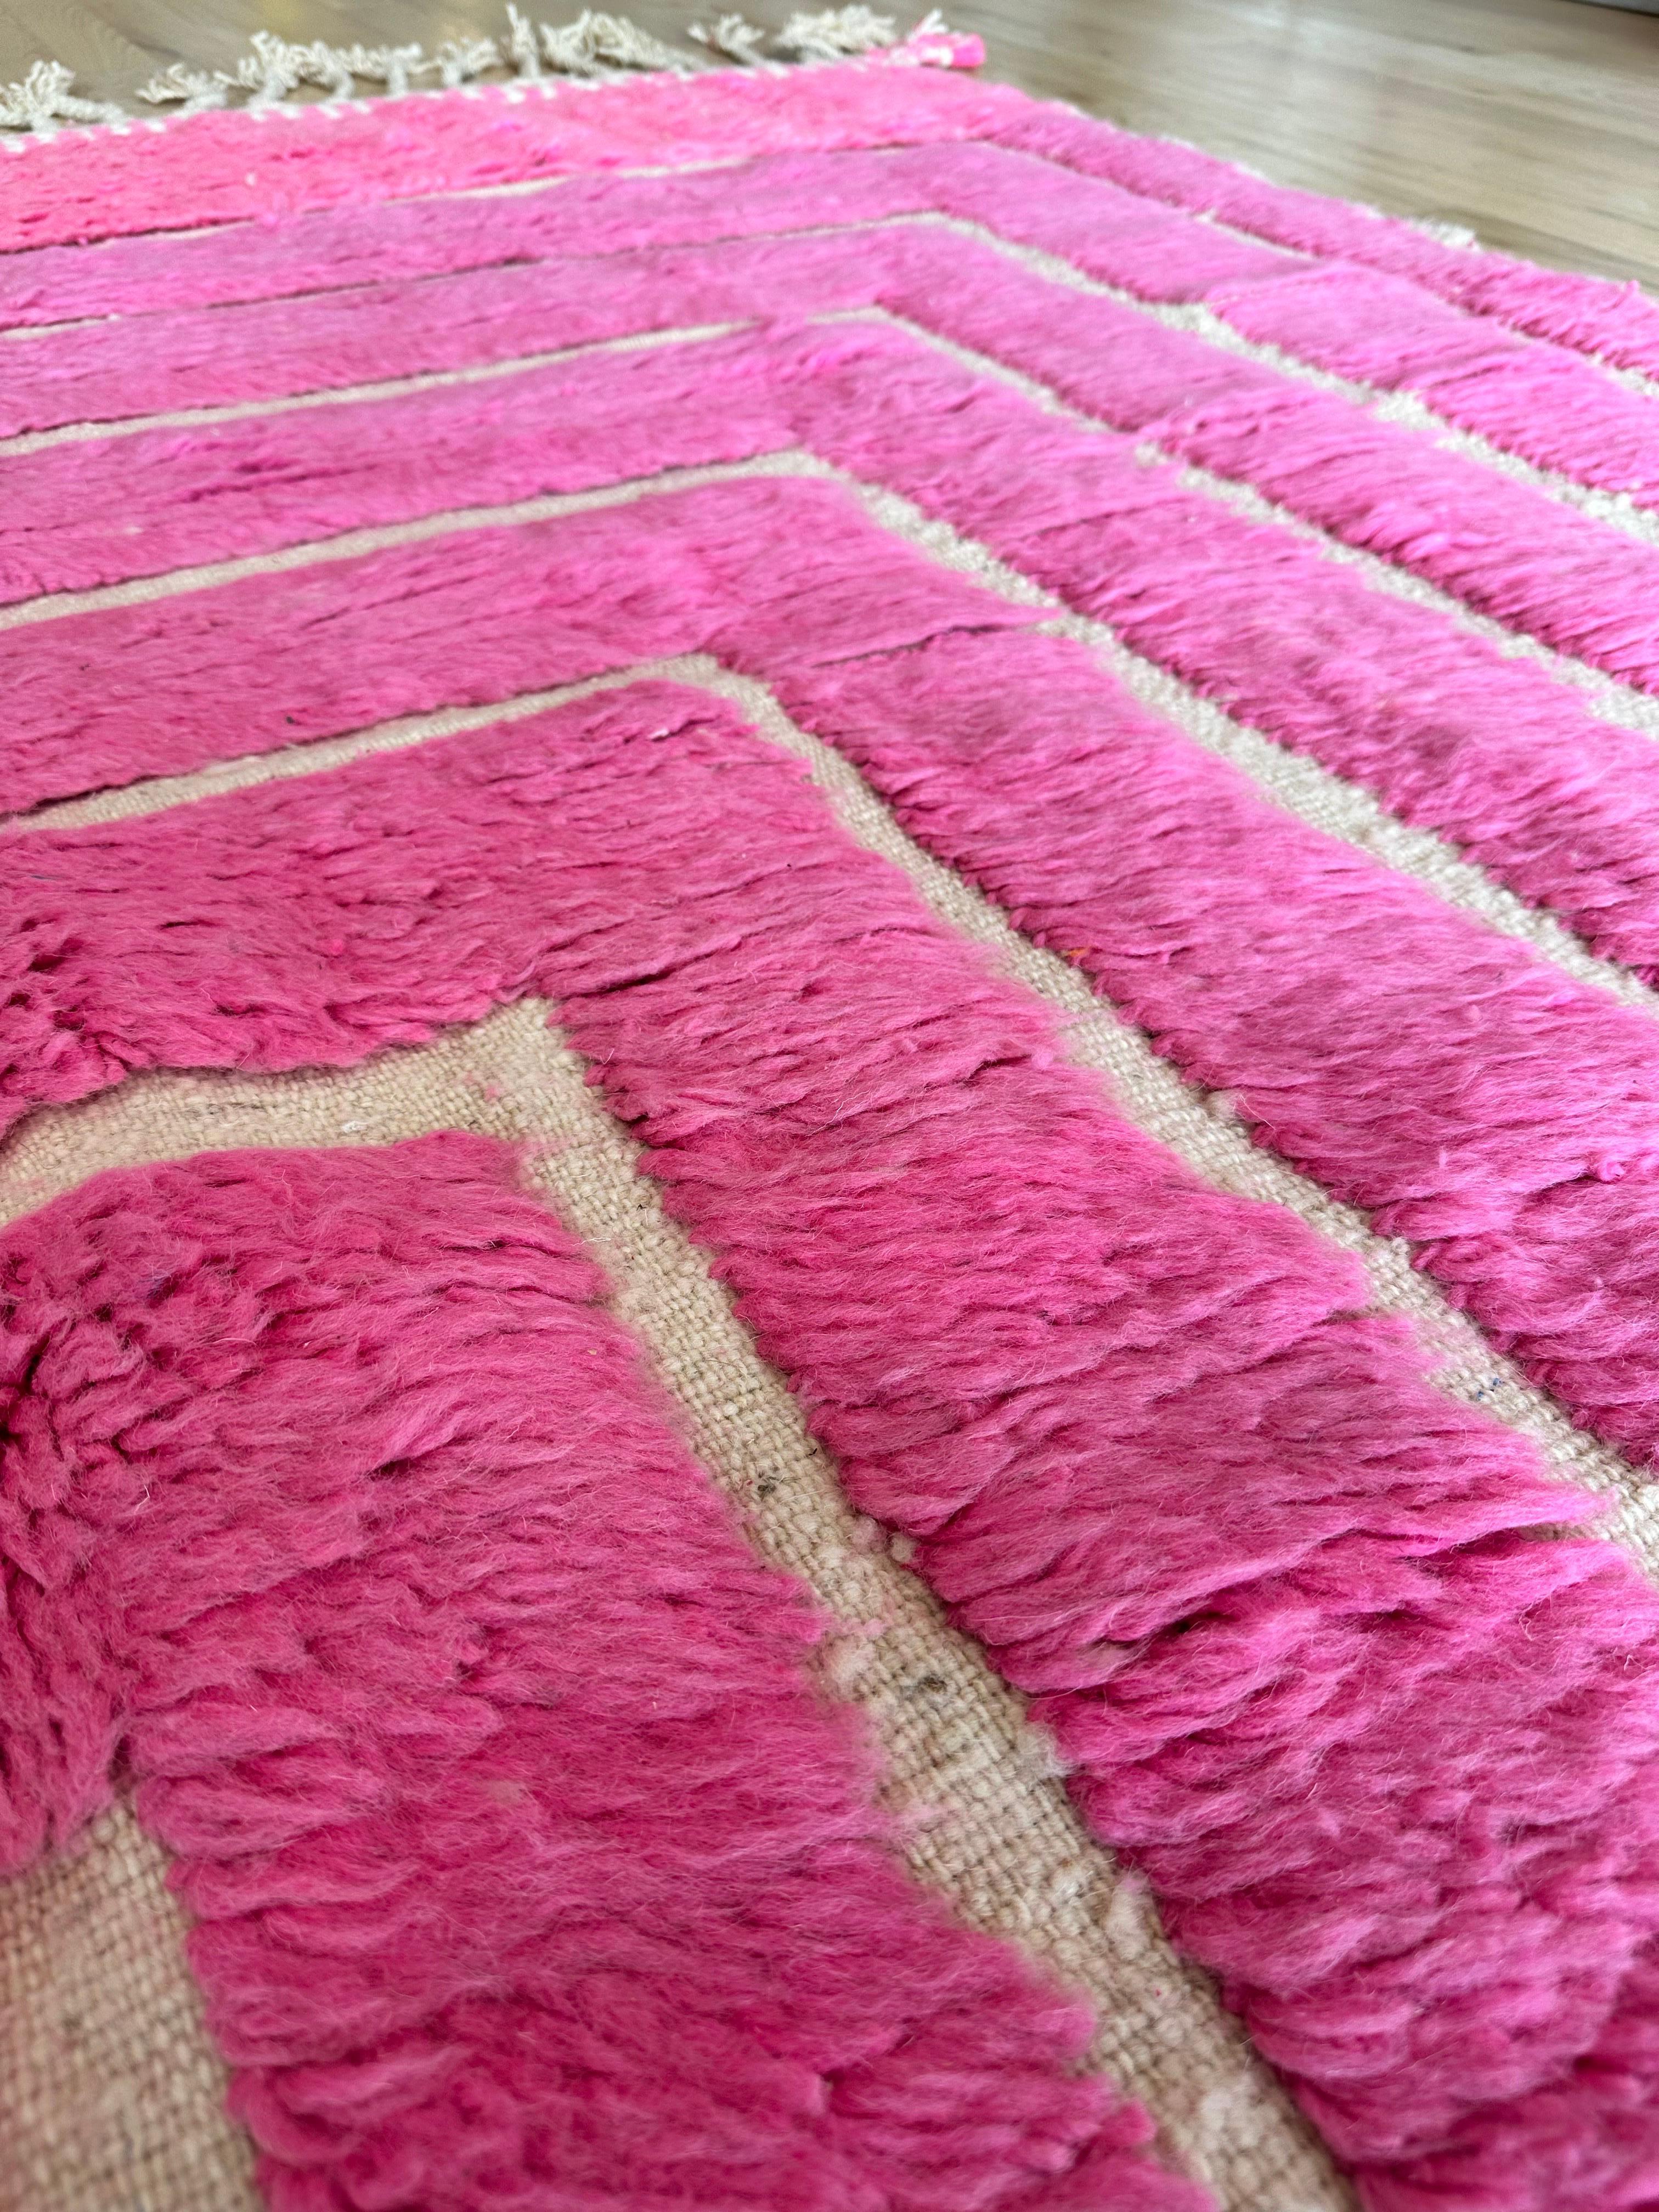 Vintage Moroccan Rug by Berber Tribes of Morocco, pink wool and cream color For Sale 4